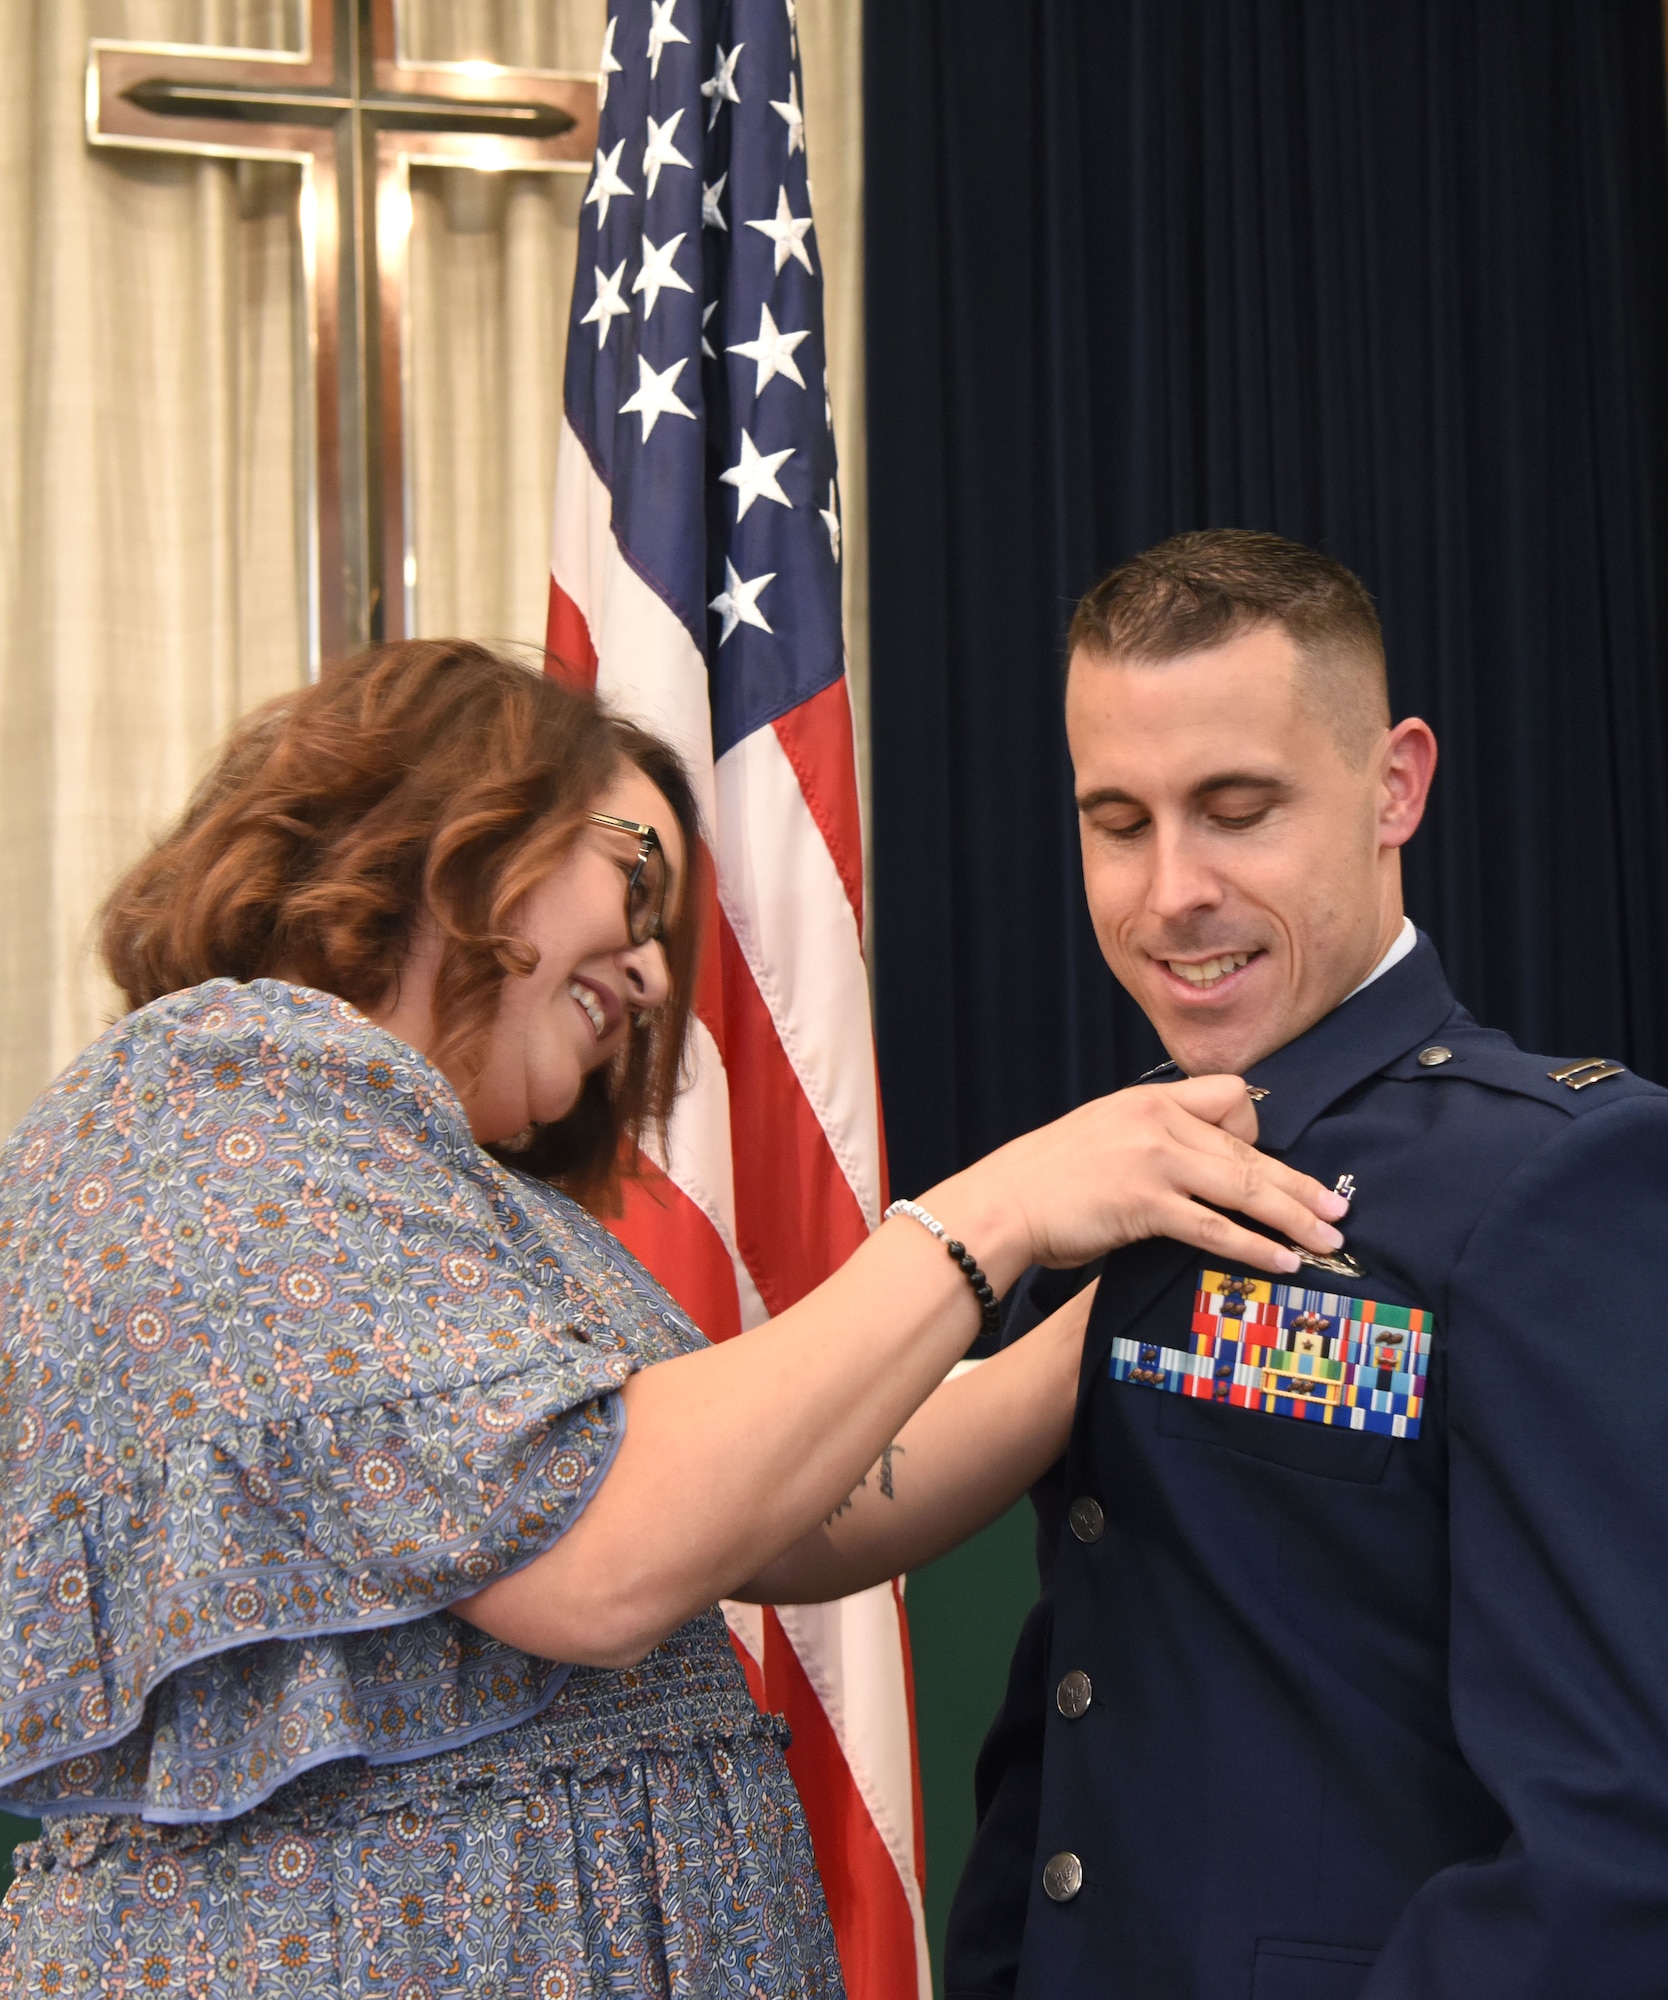 U.S. Air Force Capt. Terry Owens, right, formerly 100th Aircraft Maintenance Squadron director of operations, has the chaplain career field badge pinned on his jacket by his wife Casandra, during a recommissioning ceremony at Royal Air Force Lakenheath, England, Sept. 27, 2022. Owens started his military career as an enlisted maintainer in ground radar maintenance, before becoming a maintenance officer. His journey with religion started when he was 10 years old, when he realized it was his calling and eventually began full-time ministry. He decommissioned and recommissioned at the ceremony and is now a captain-chaplain, continuing his calling at F.E. Warren, Wyoming. The religiously oriented private organization that Owens led over the past year was the first of its kind in the Air Force. (U.S. Air Force photo by Karen Abeyasekere)